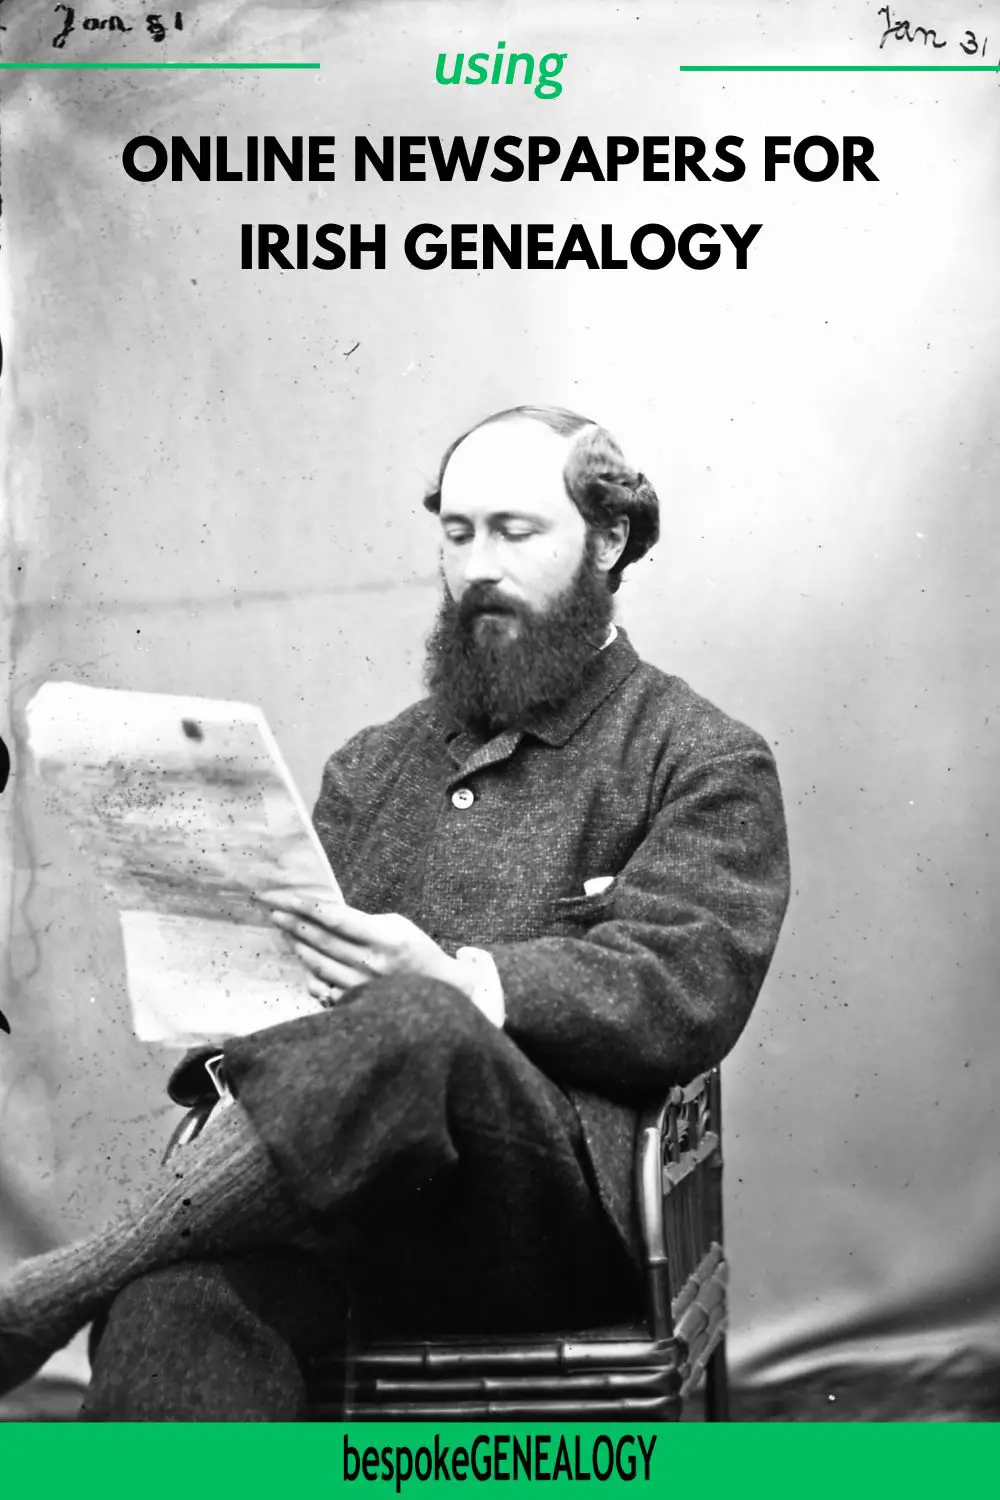 Using online newspapers for Irish genealogy. Photo from 1866 of a Mr Ambrose Congreve reading a newspaper in County Galway, Ireland.